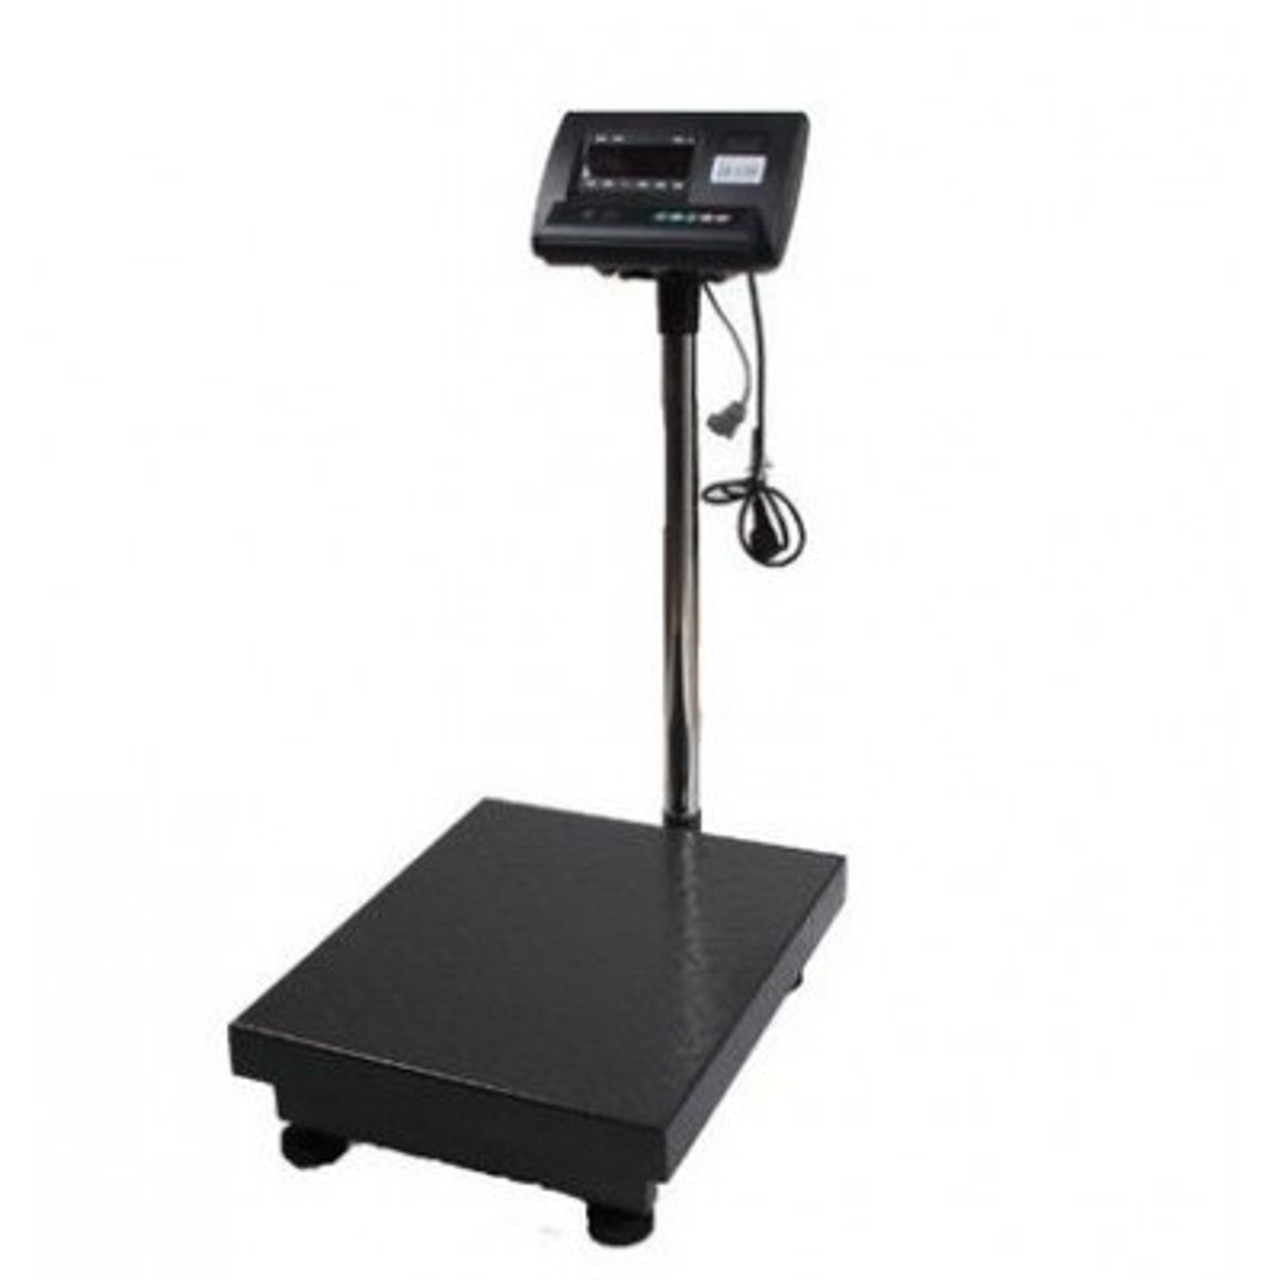 Buy Online Digital Electronic Weighing Scale A-12 - 300KG from GZ  Industrial Supplies